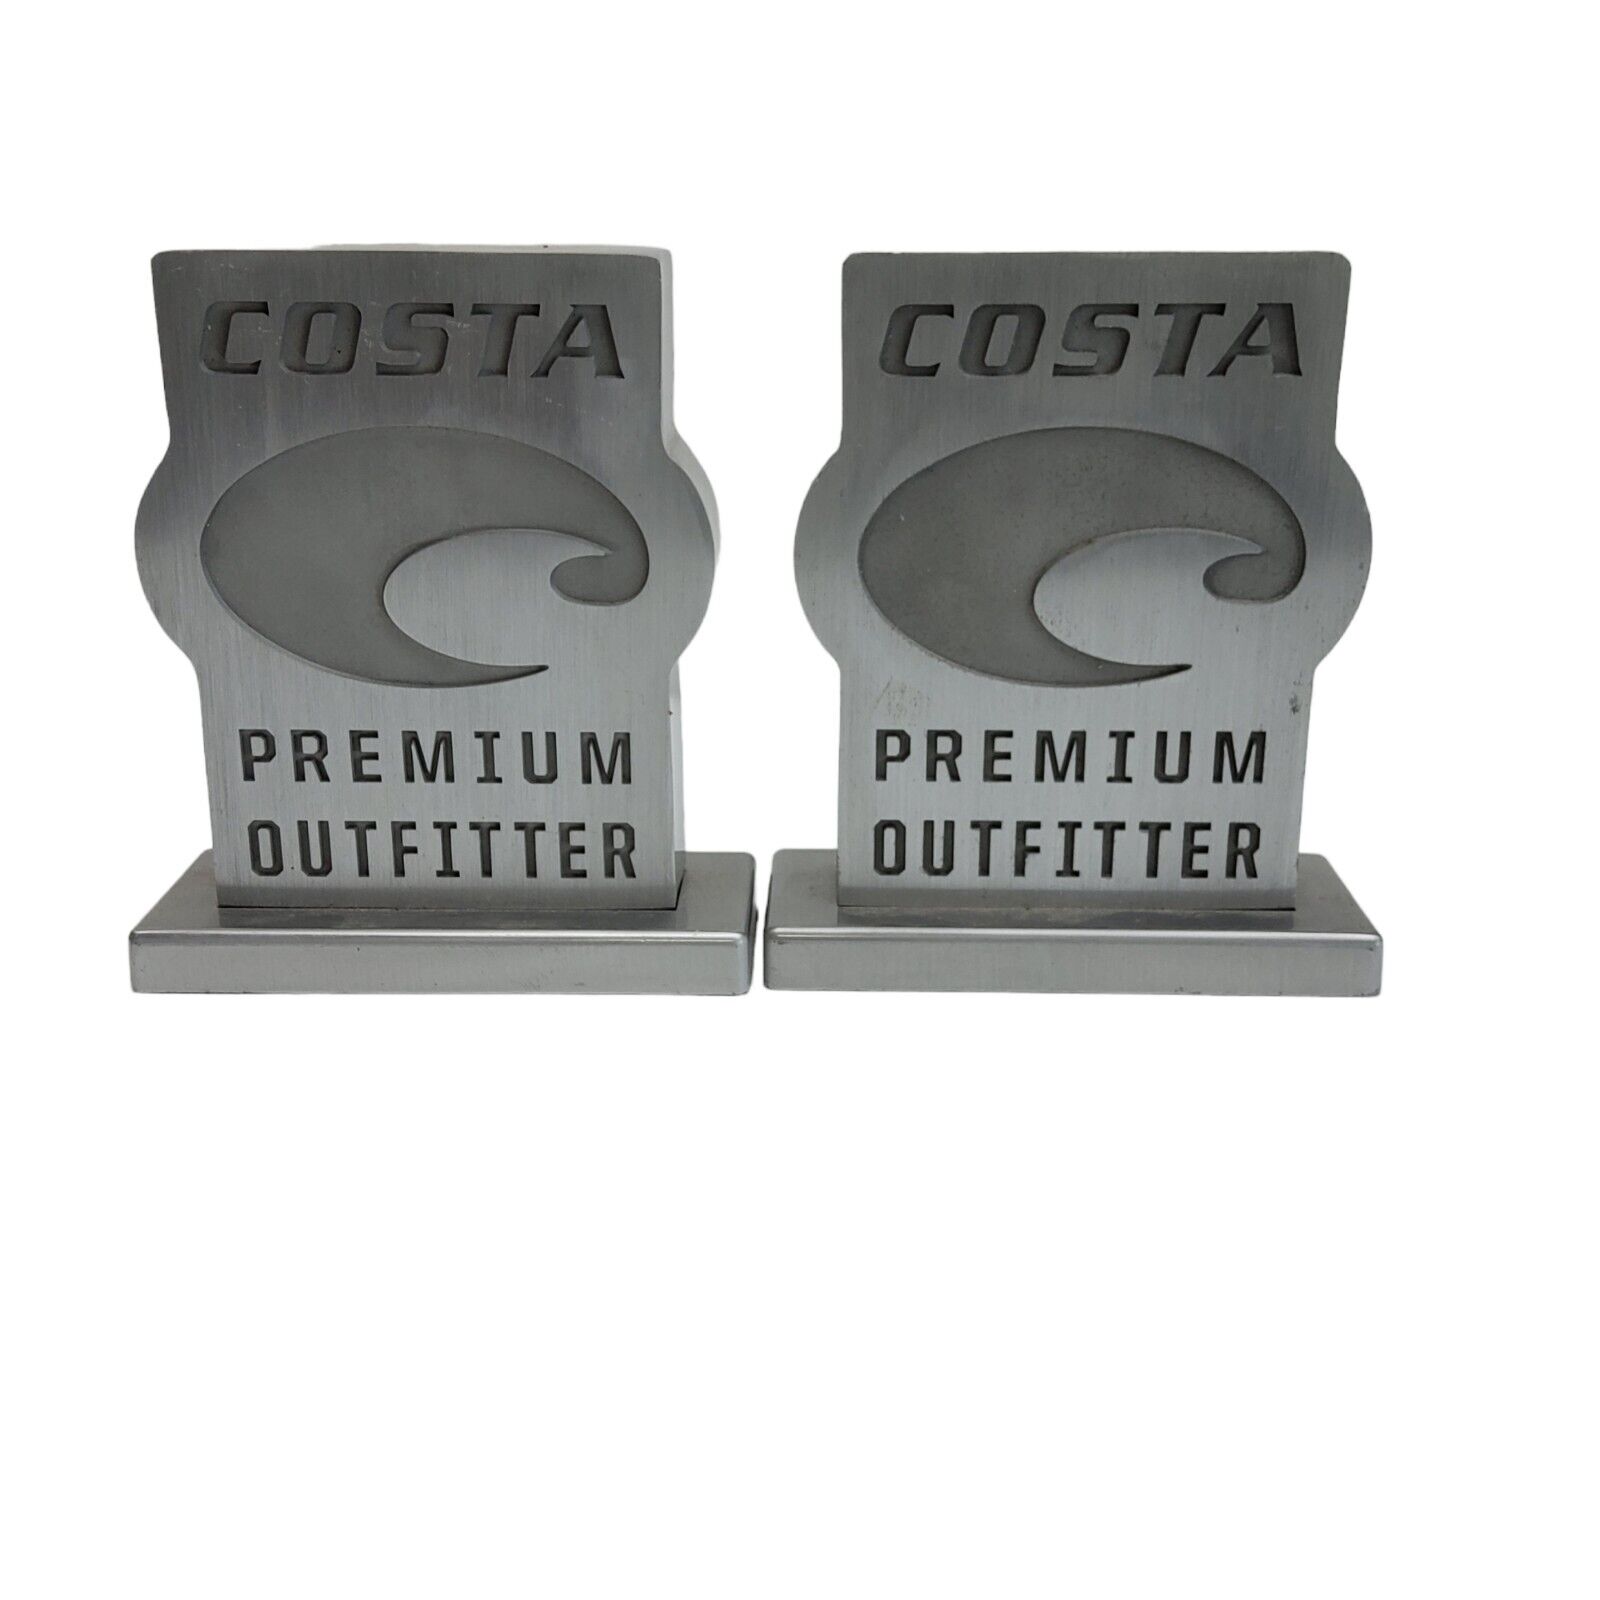 Costa Premium Outfitters Metal Retail Display Signs Set Of 2